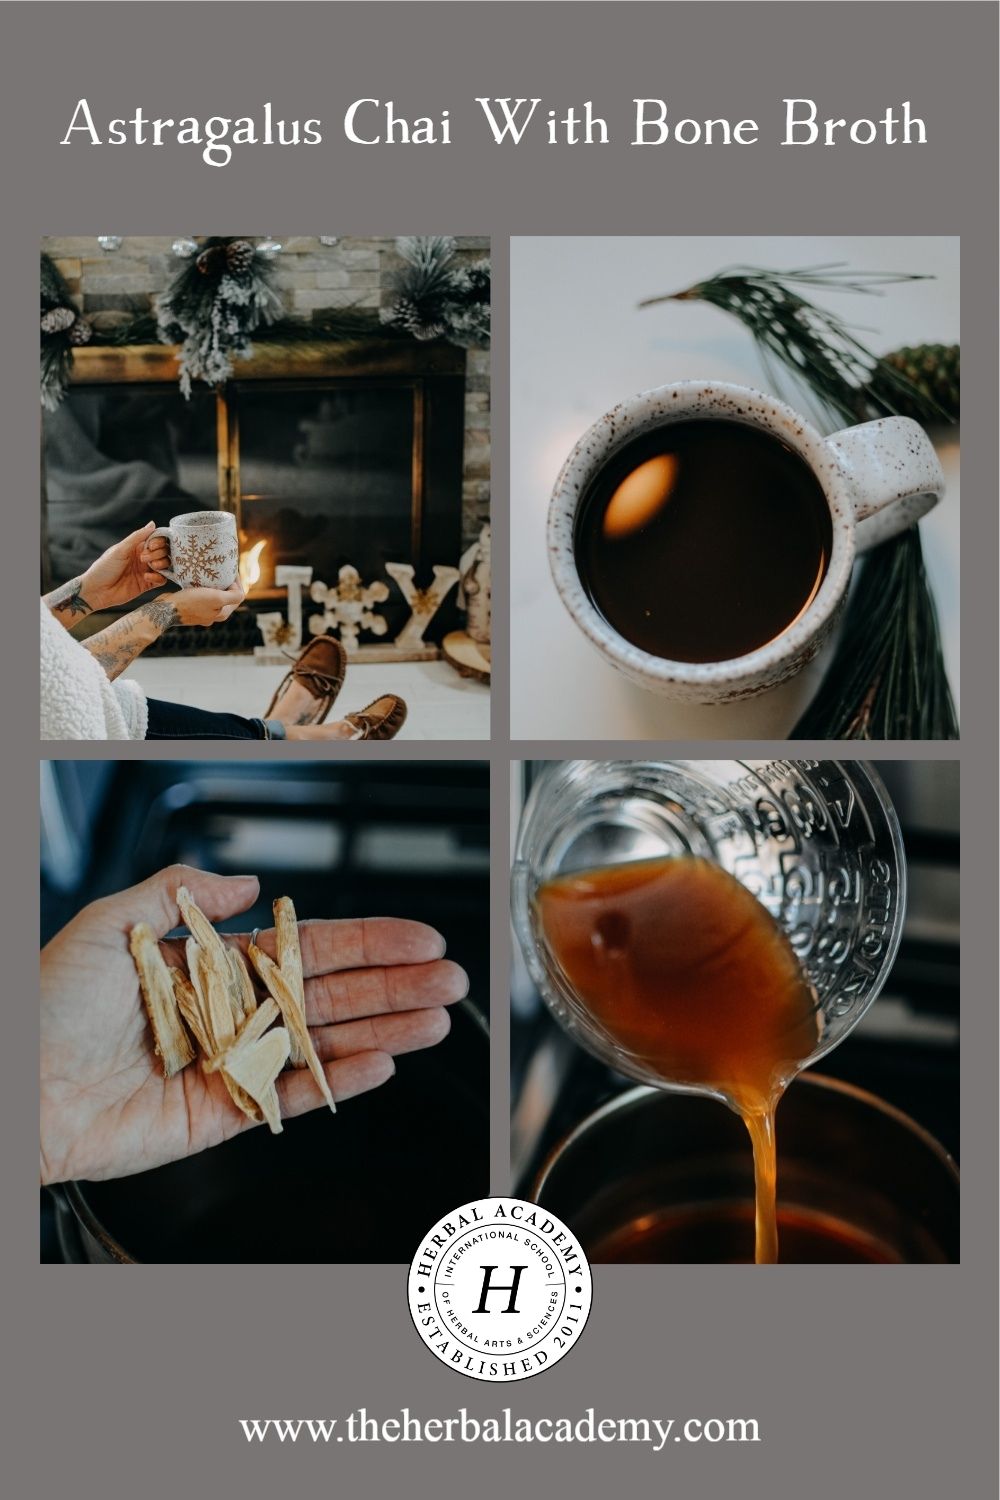 Astragalus Chai with Bone Broth | Herbal Academy | One drink to add to your stovetop is this astragalus chai tea recipe with added nourishing ingredients to get you through the winter.